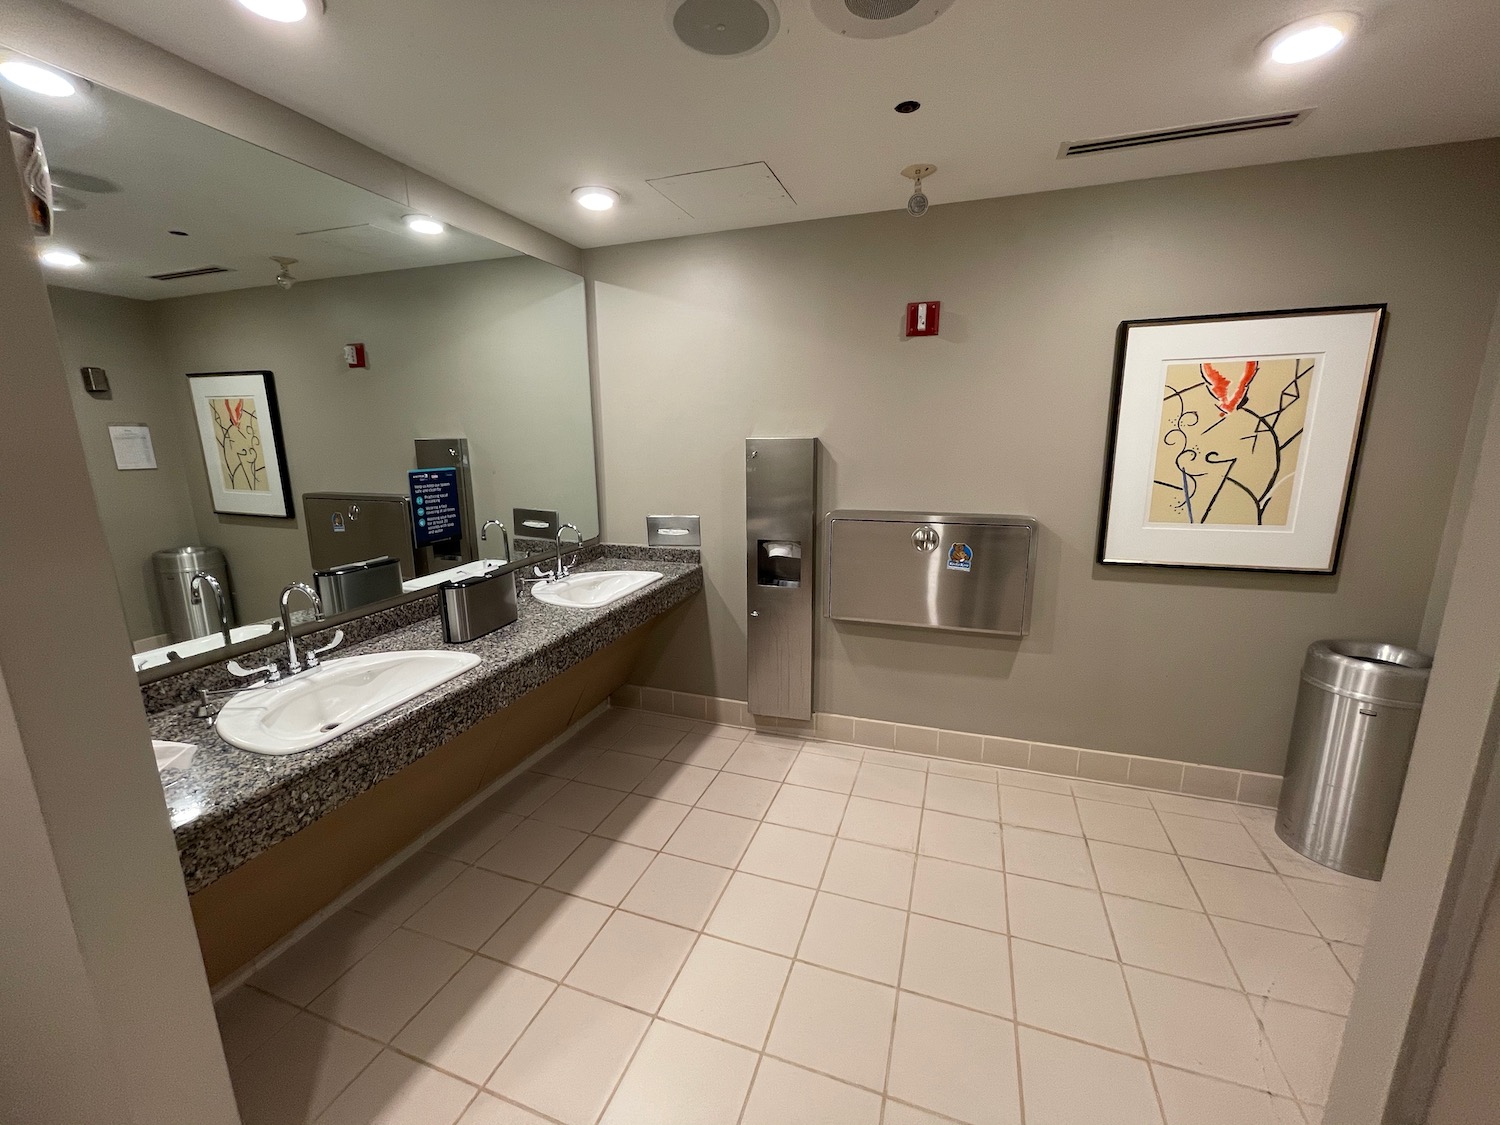 a bathroom with sinks and urinals